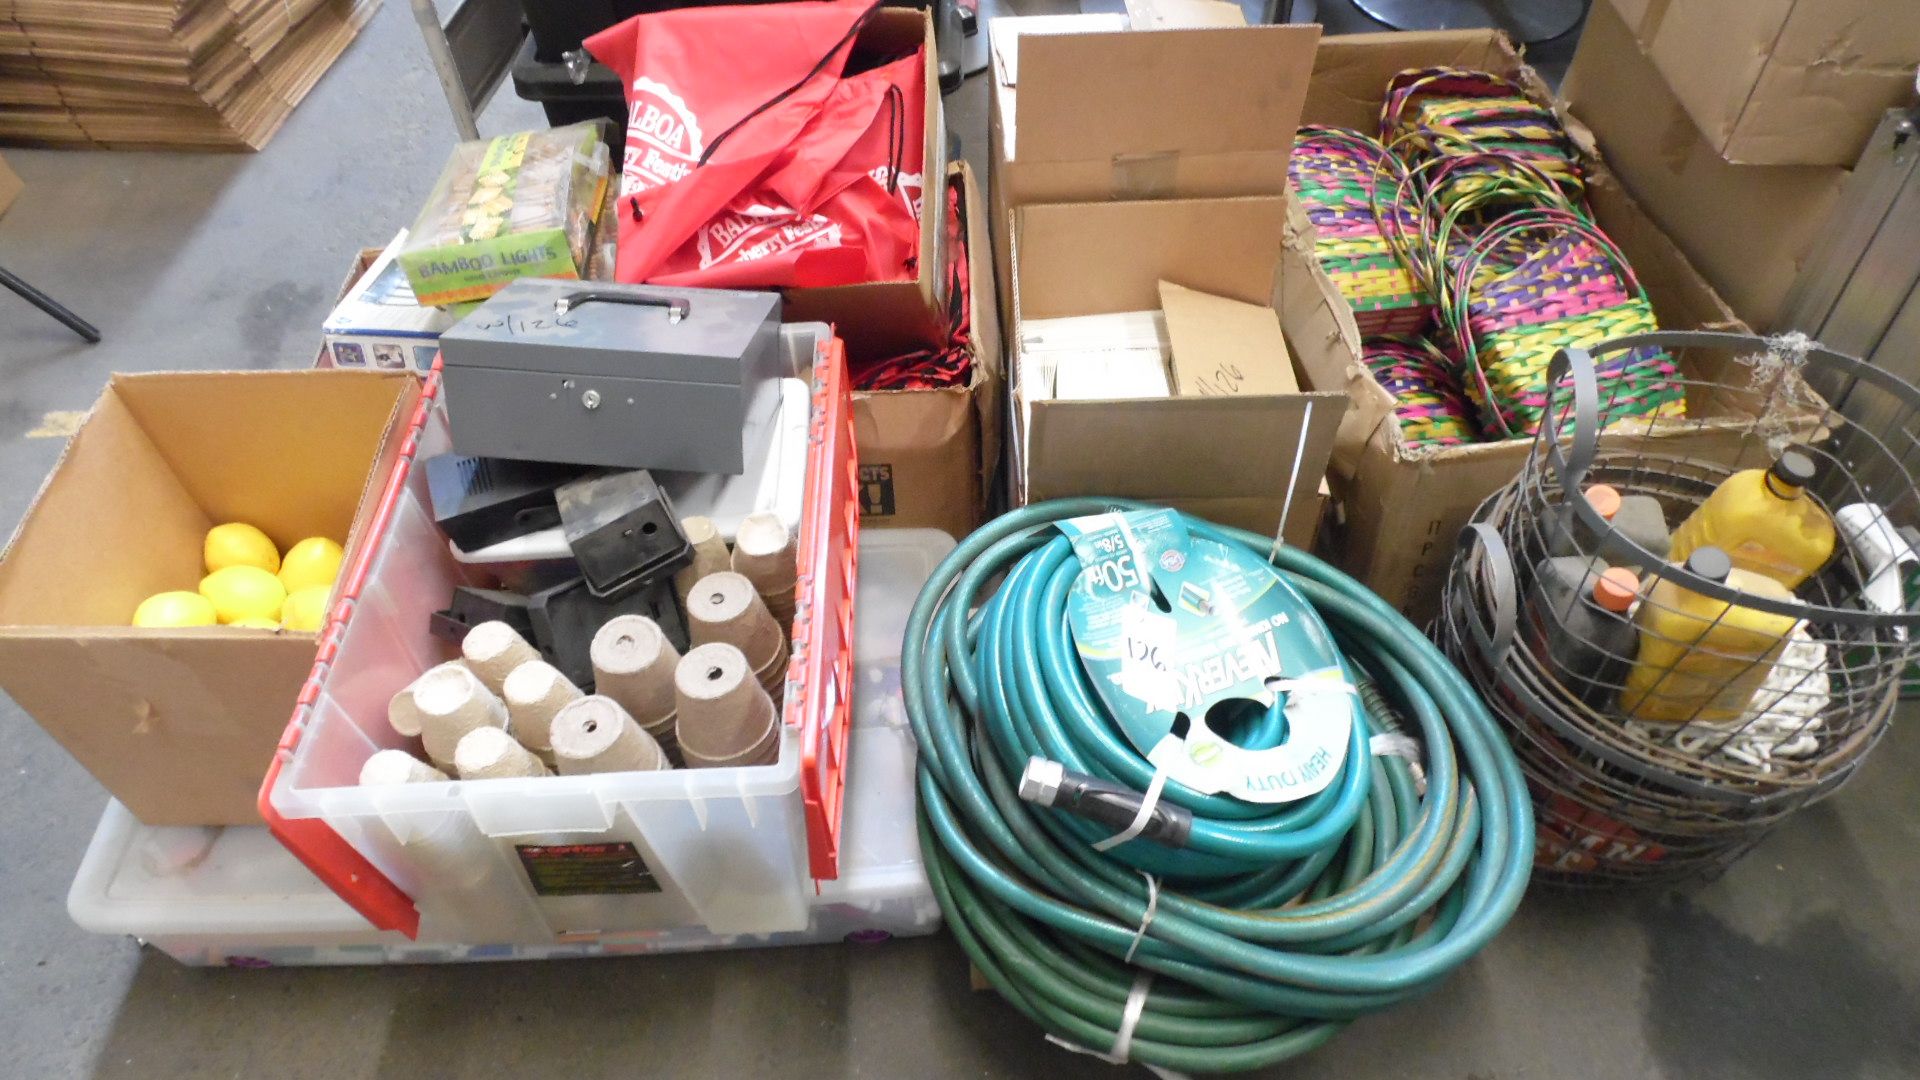 LOT OF HOSES / BAGS / BASKETS